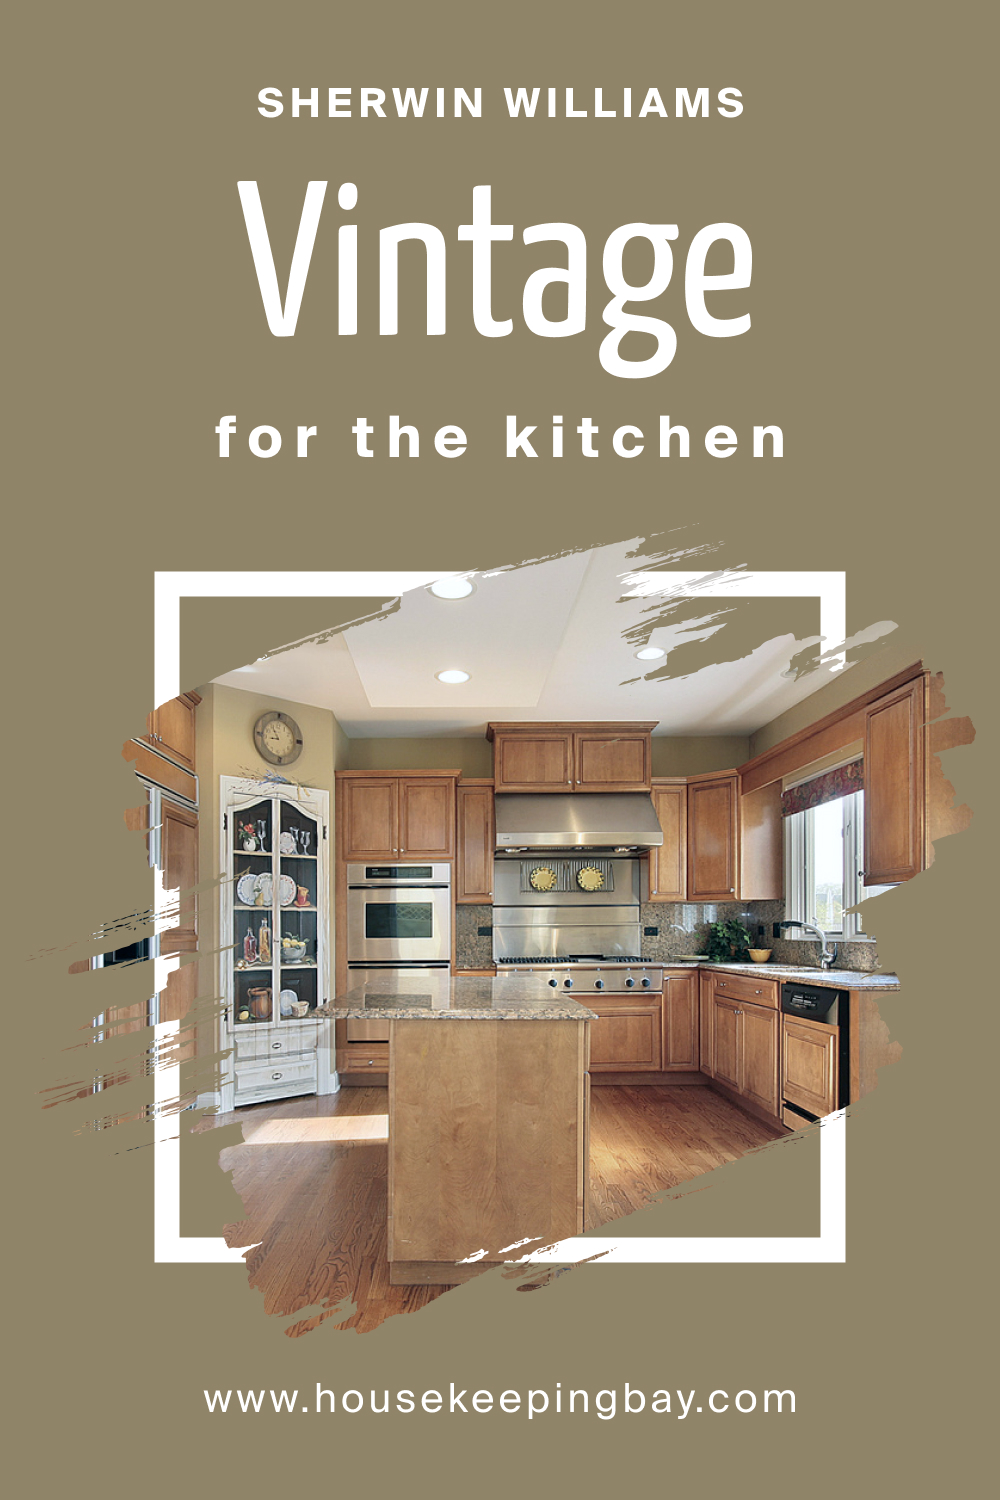 Sherwin Williams. SW 9528 Vintage For the Kitchens